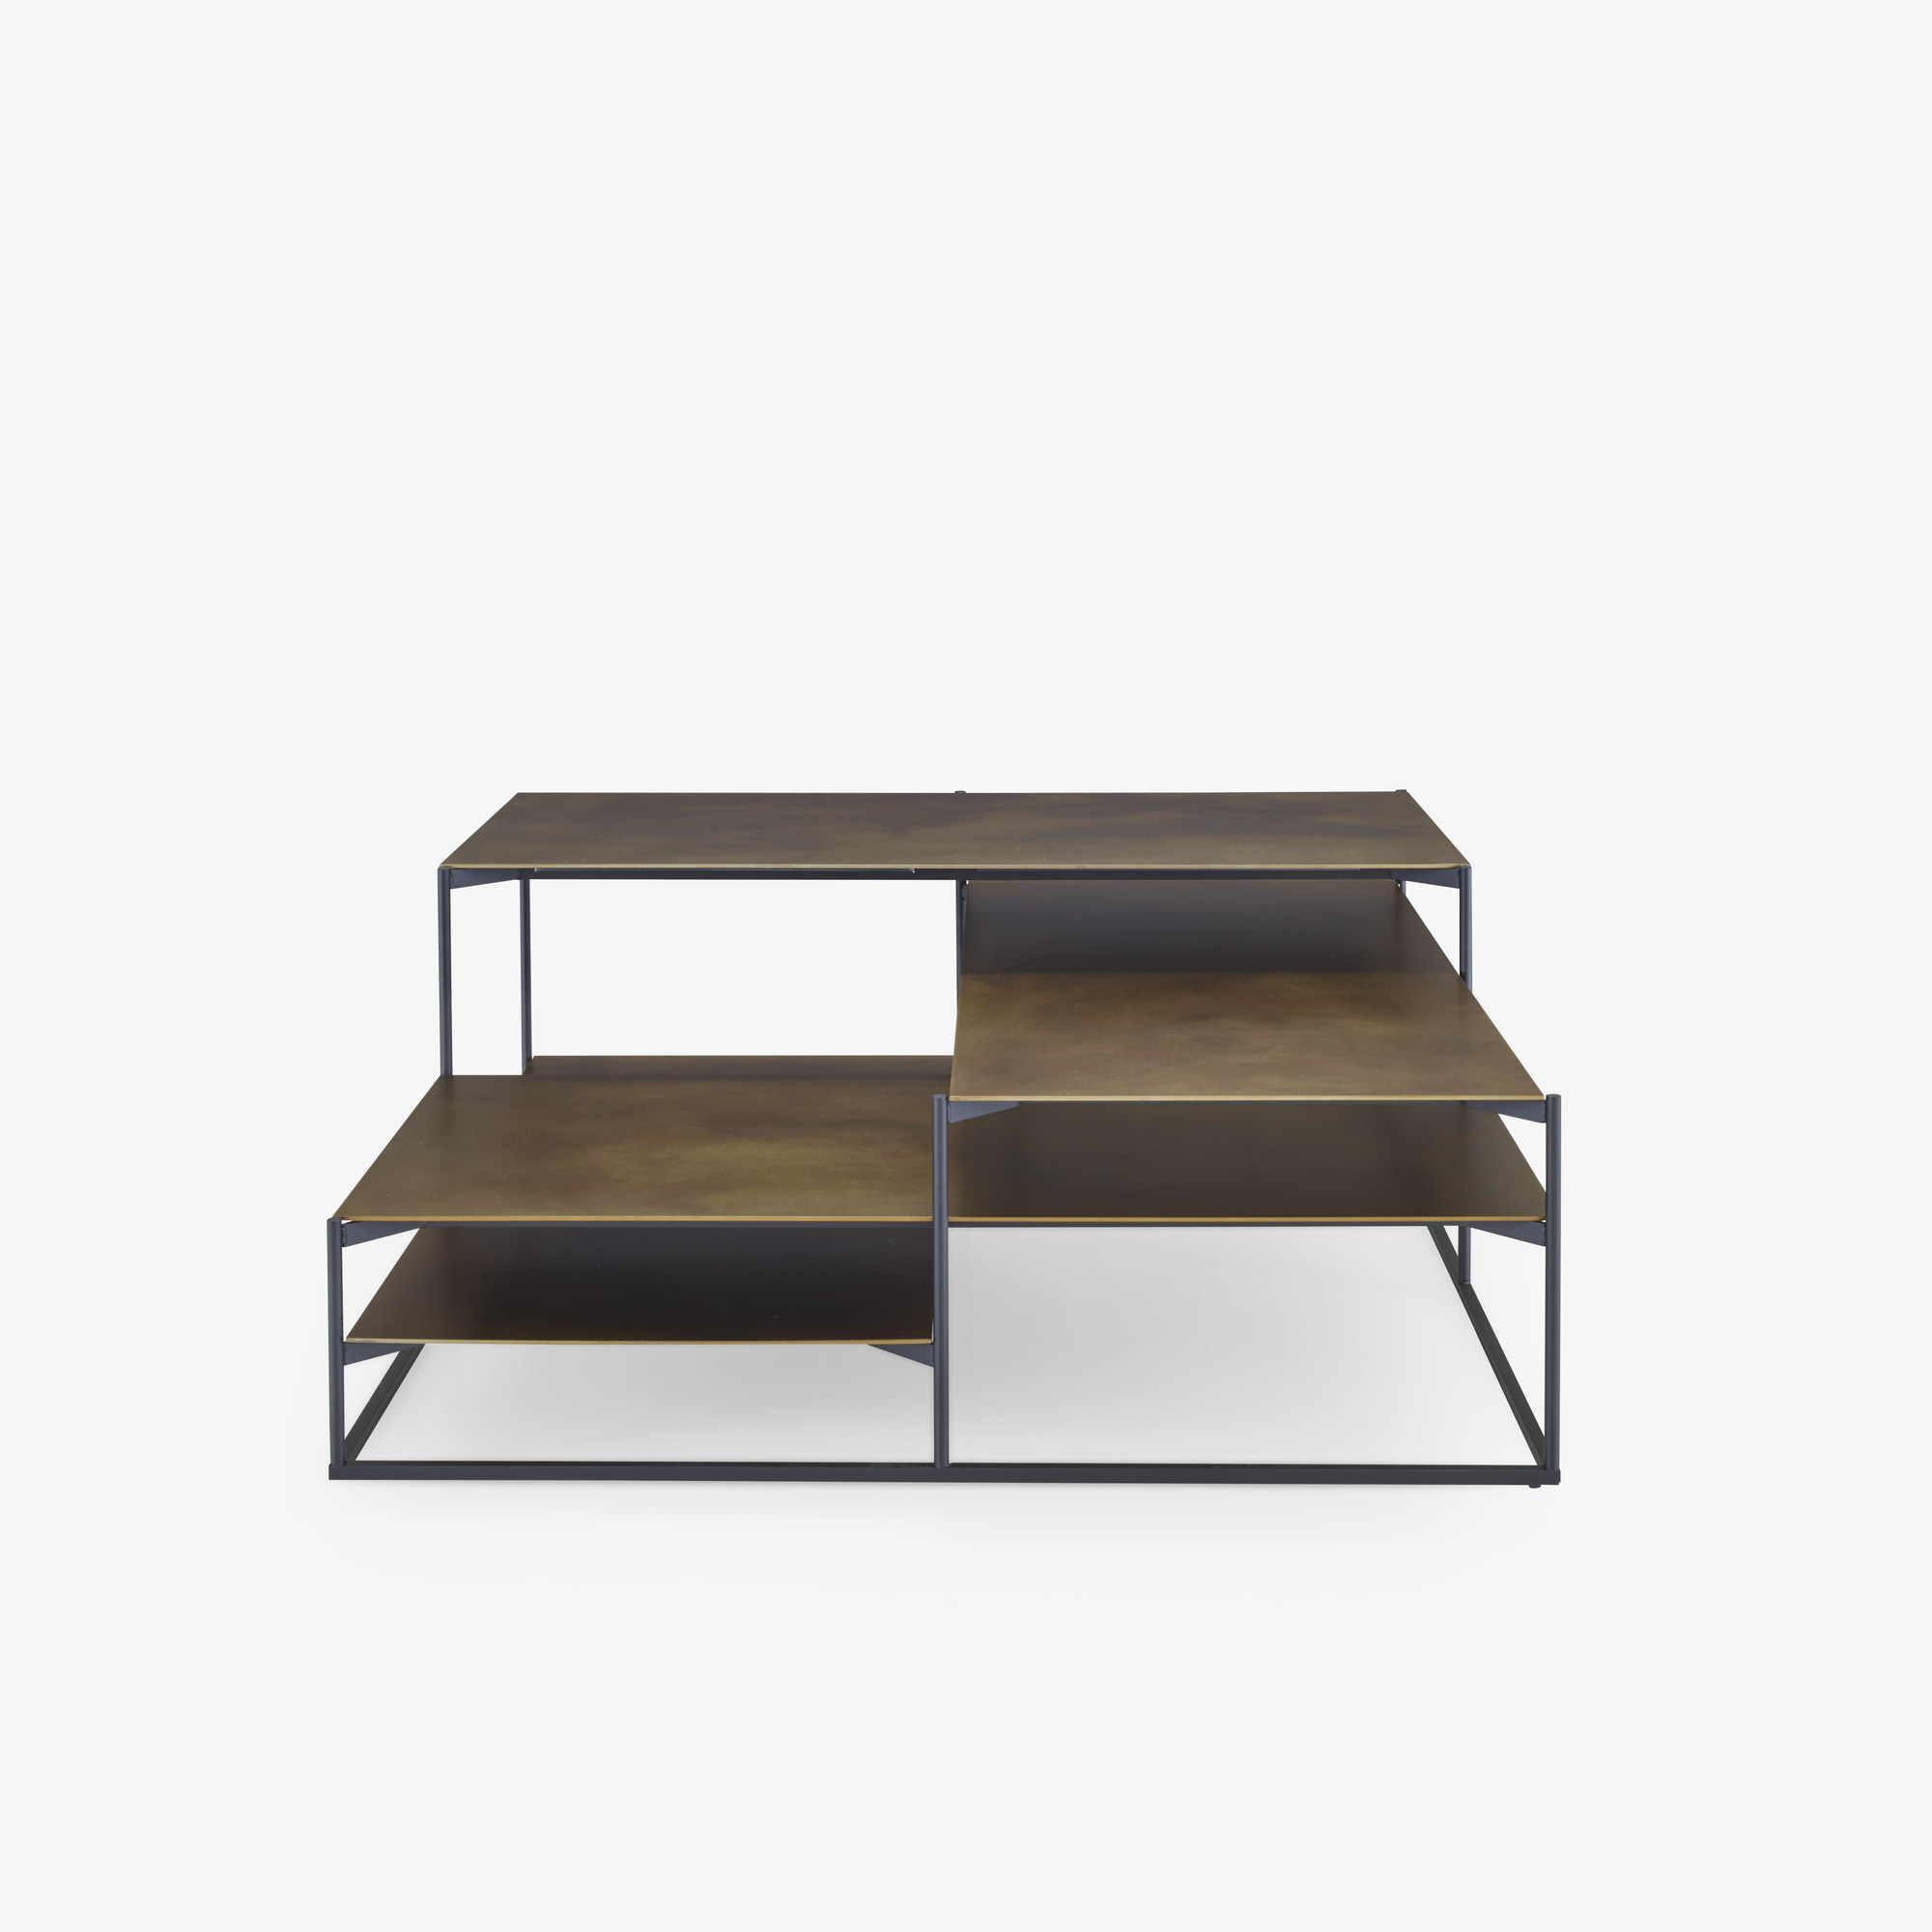 Image Low table small tops in golden brass aspect steel 1